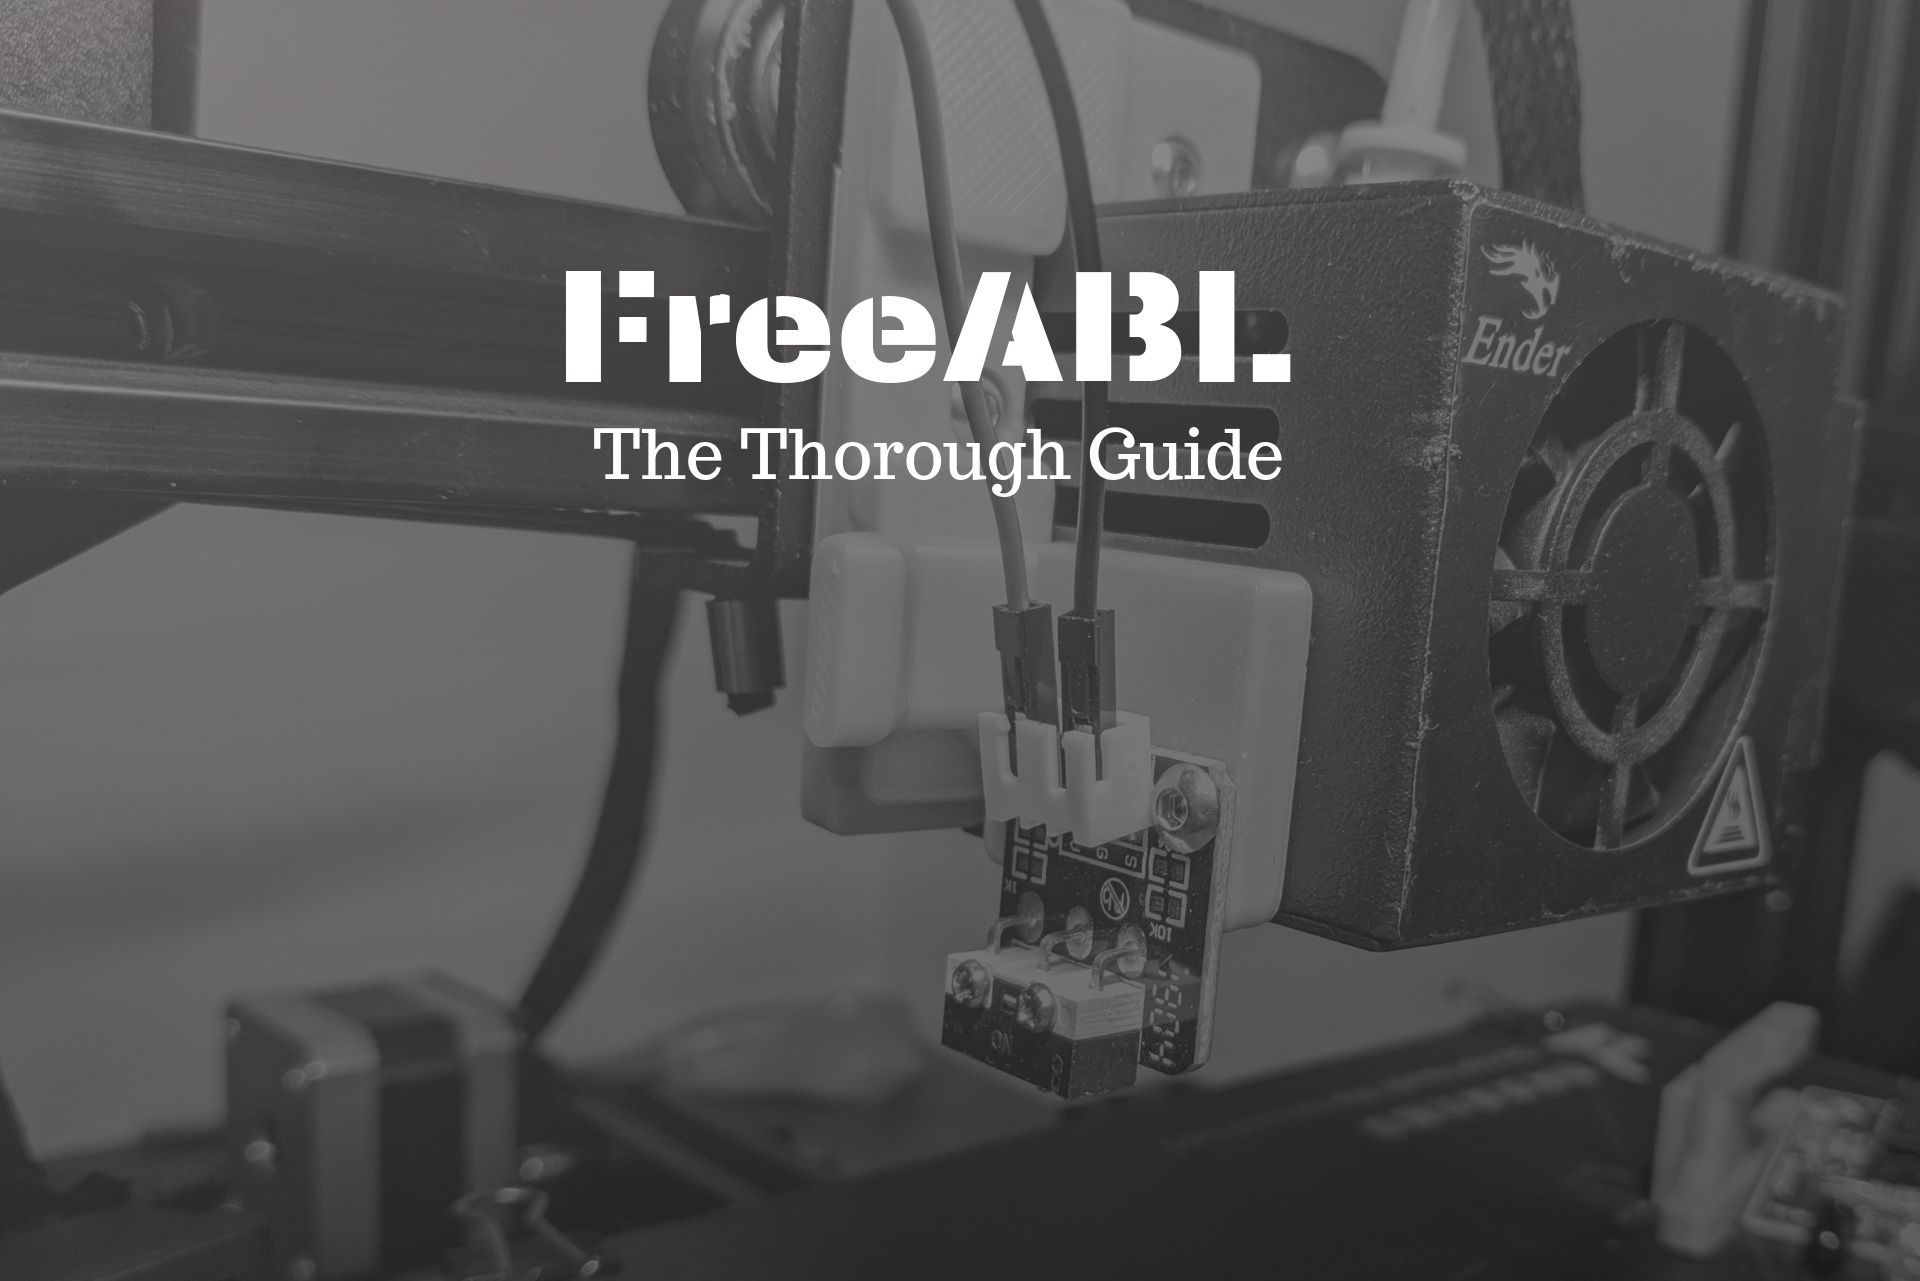 FreeABL - The cheapest and free ABL for Ender 3